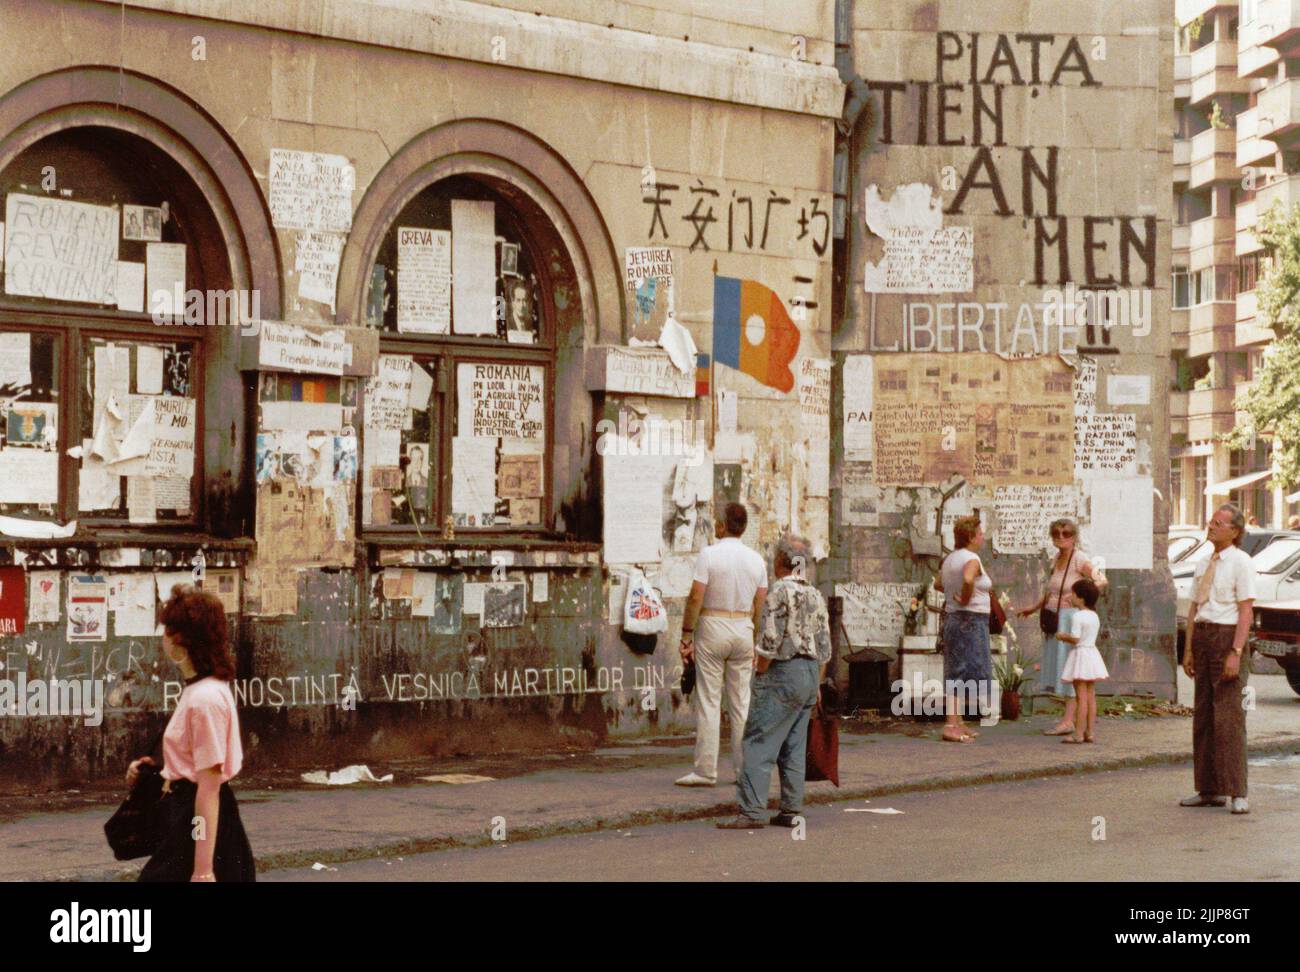 Bucharest, Romania, 1990. A few months after the anticommunist revolution of 1989, the facade of the University of Architecture is still covered in posters and messages posted by people during the uprising. The University Square, one of the key points in the revolution, remained a battle ground against the new political system, composed mainly of former communist officials. Stock Photo